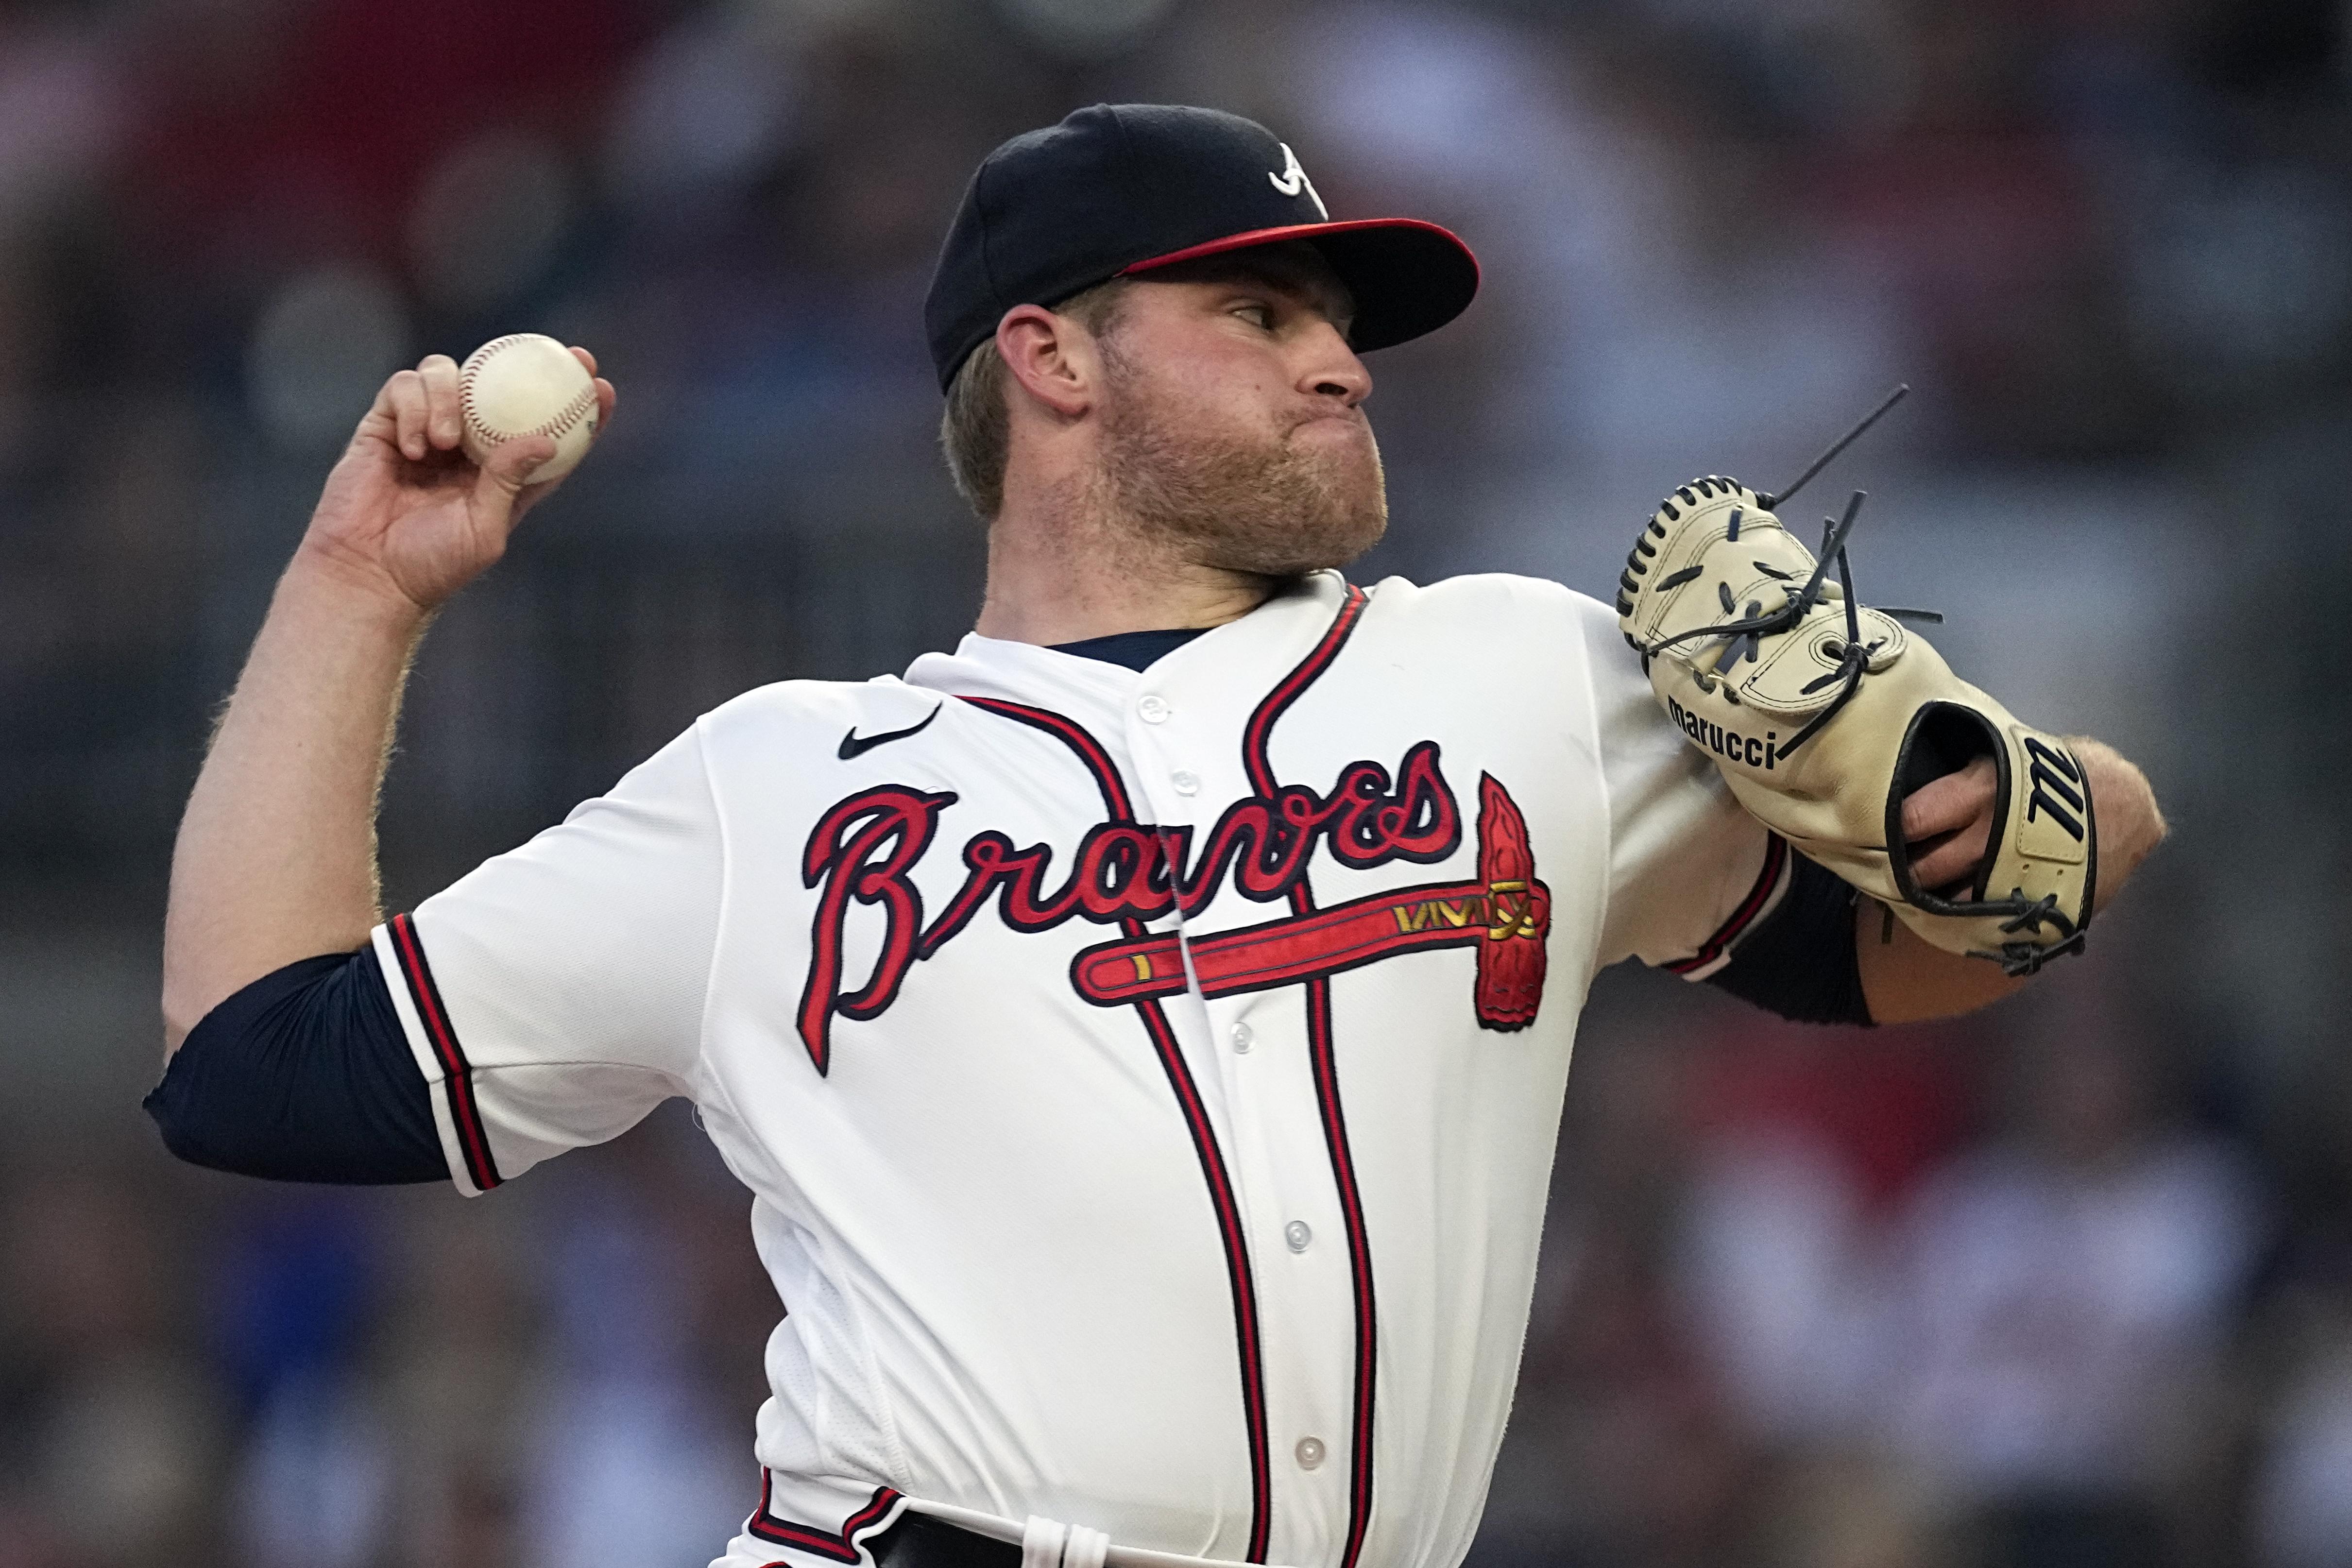 Braves flop in Philly for second straight season, 100 wins again